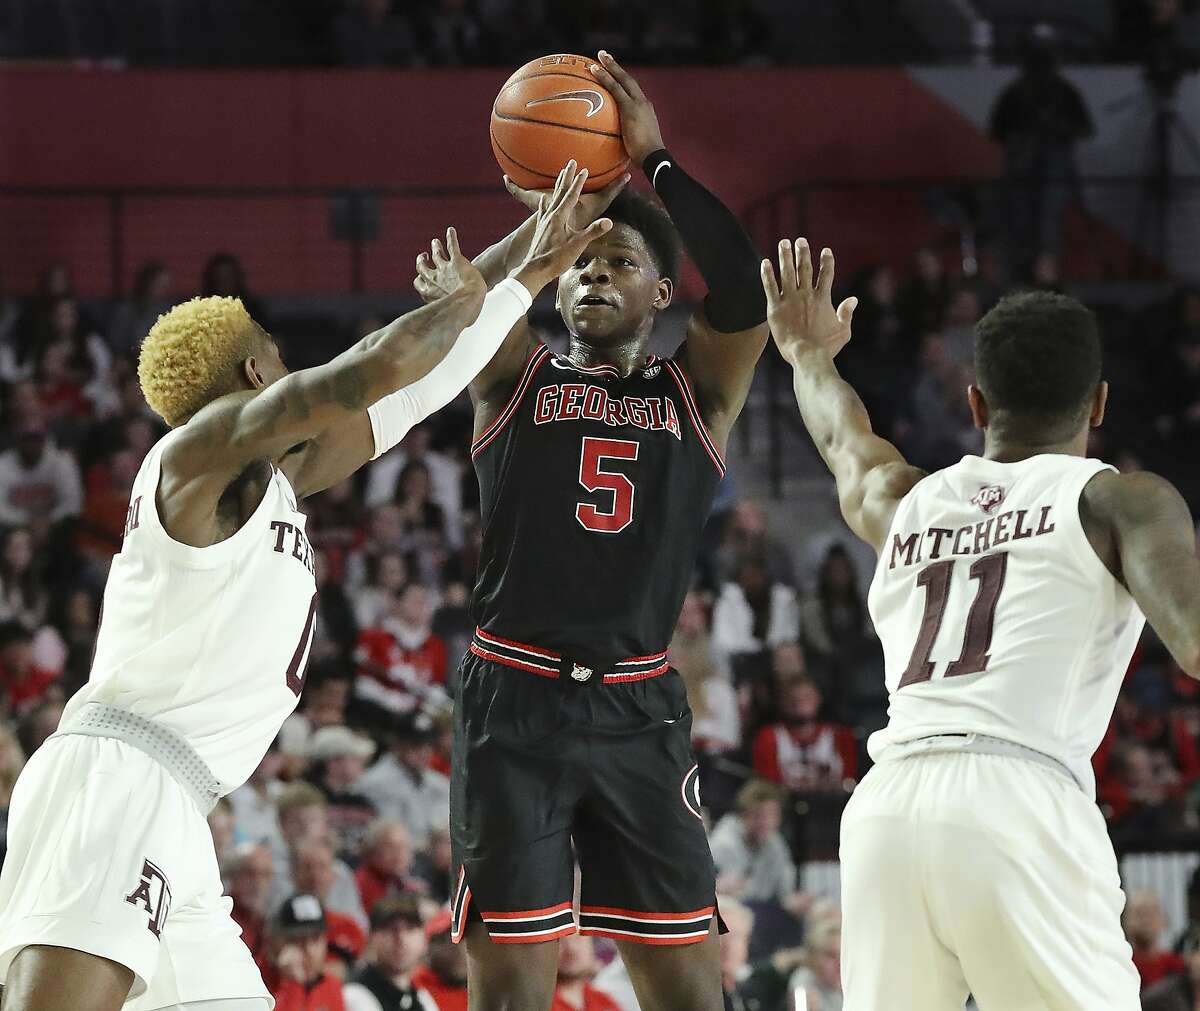 Georgia guard Anthony Edwards shoots over a double team by Texas A&M defenders Jay Jay Chandler, left, and Wendell Mitchell (11) during the first half of an NCAA college basketball game, Saturday, Feb. 1, 2020, in Athens. (Curtis Compton/Atlanta Journal-Constitution via AP)